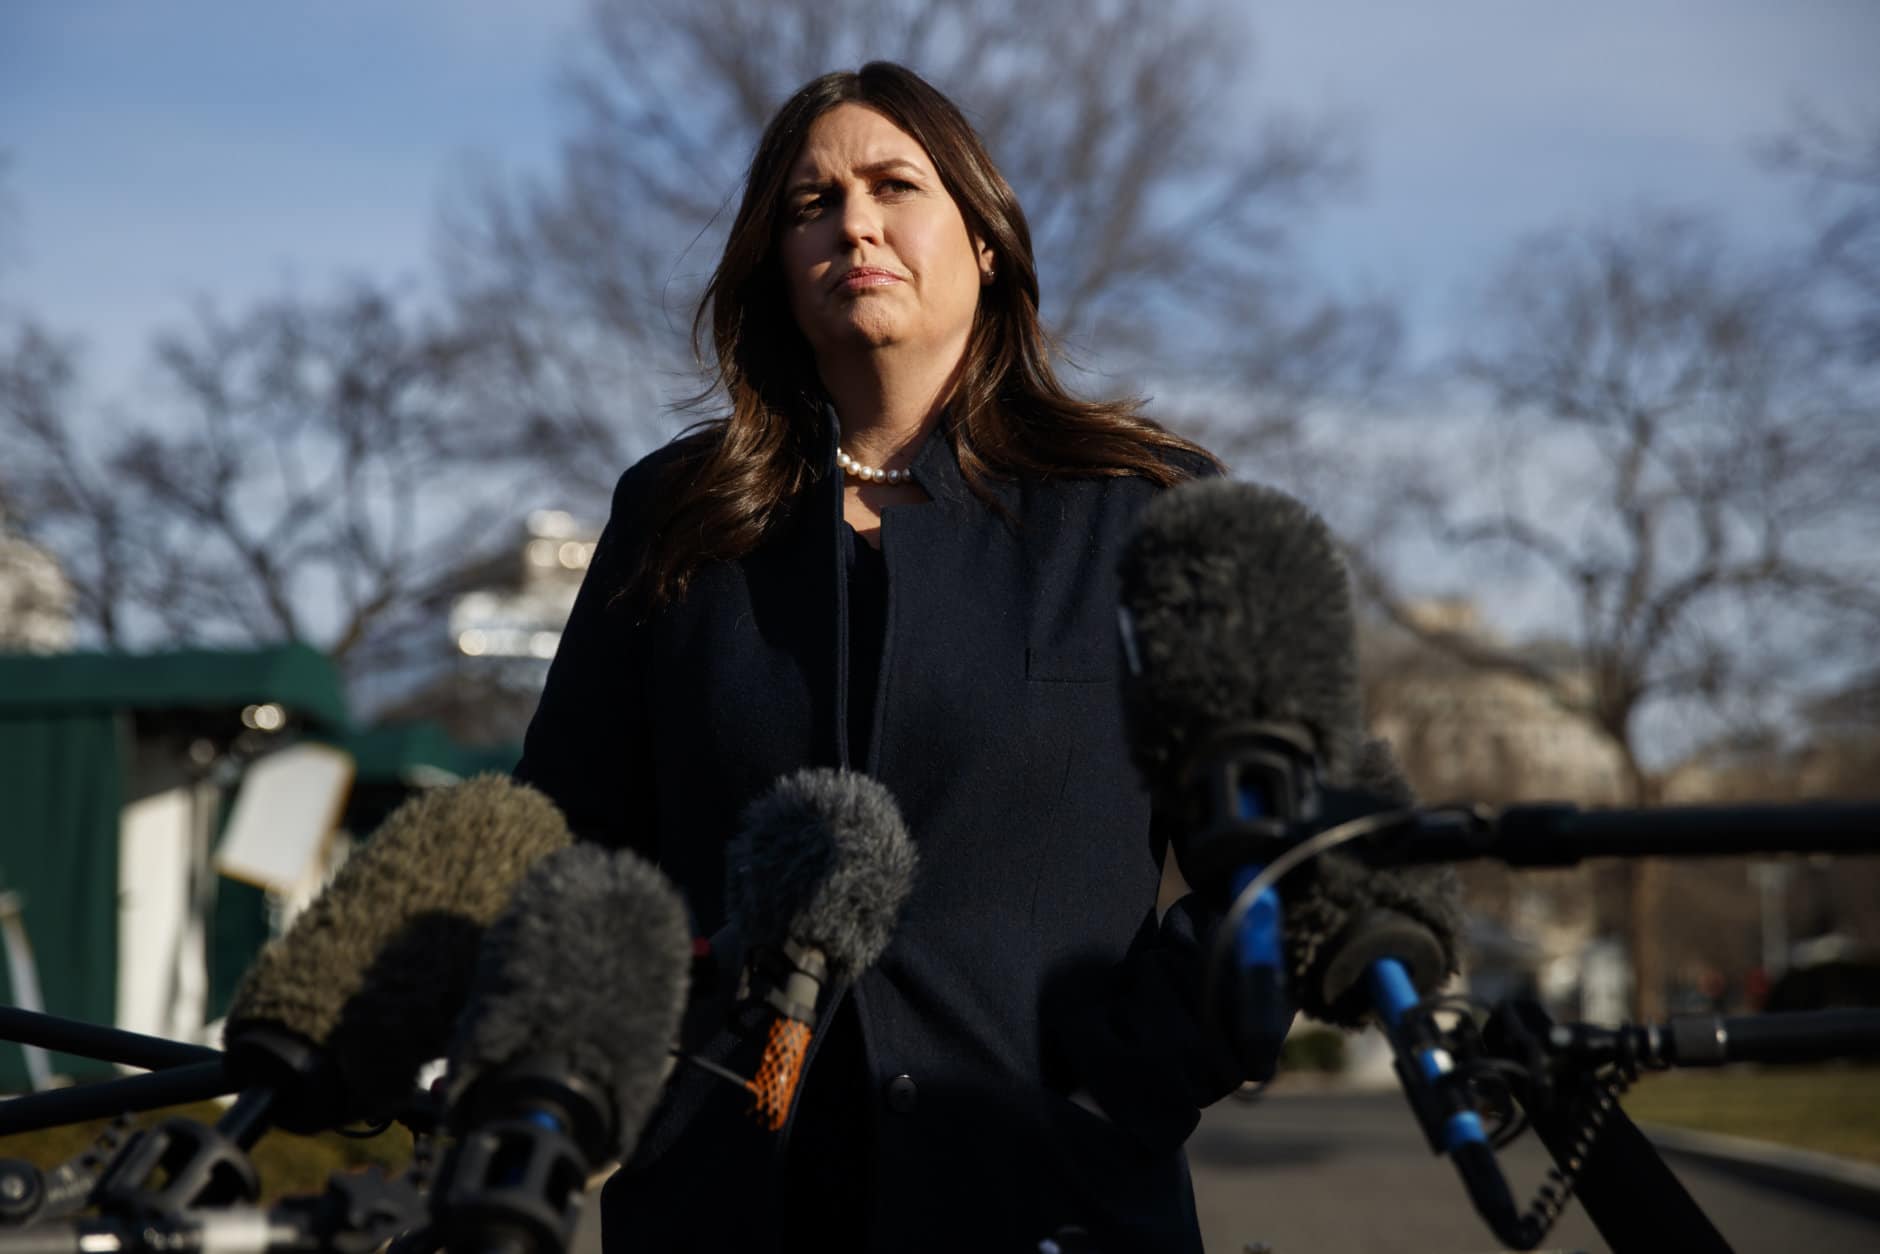 White House press secretary Sarah Huckabee Sanders listens to a question as she speaks with reporters outside the White House, Friday, Jan. 25, 2019, in Washington. (AP Photo/ Evan Vucci)